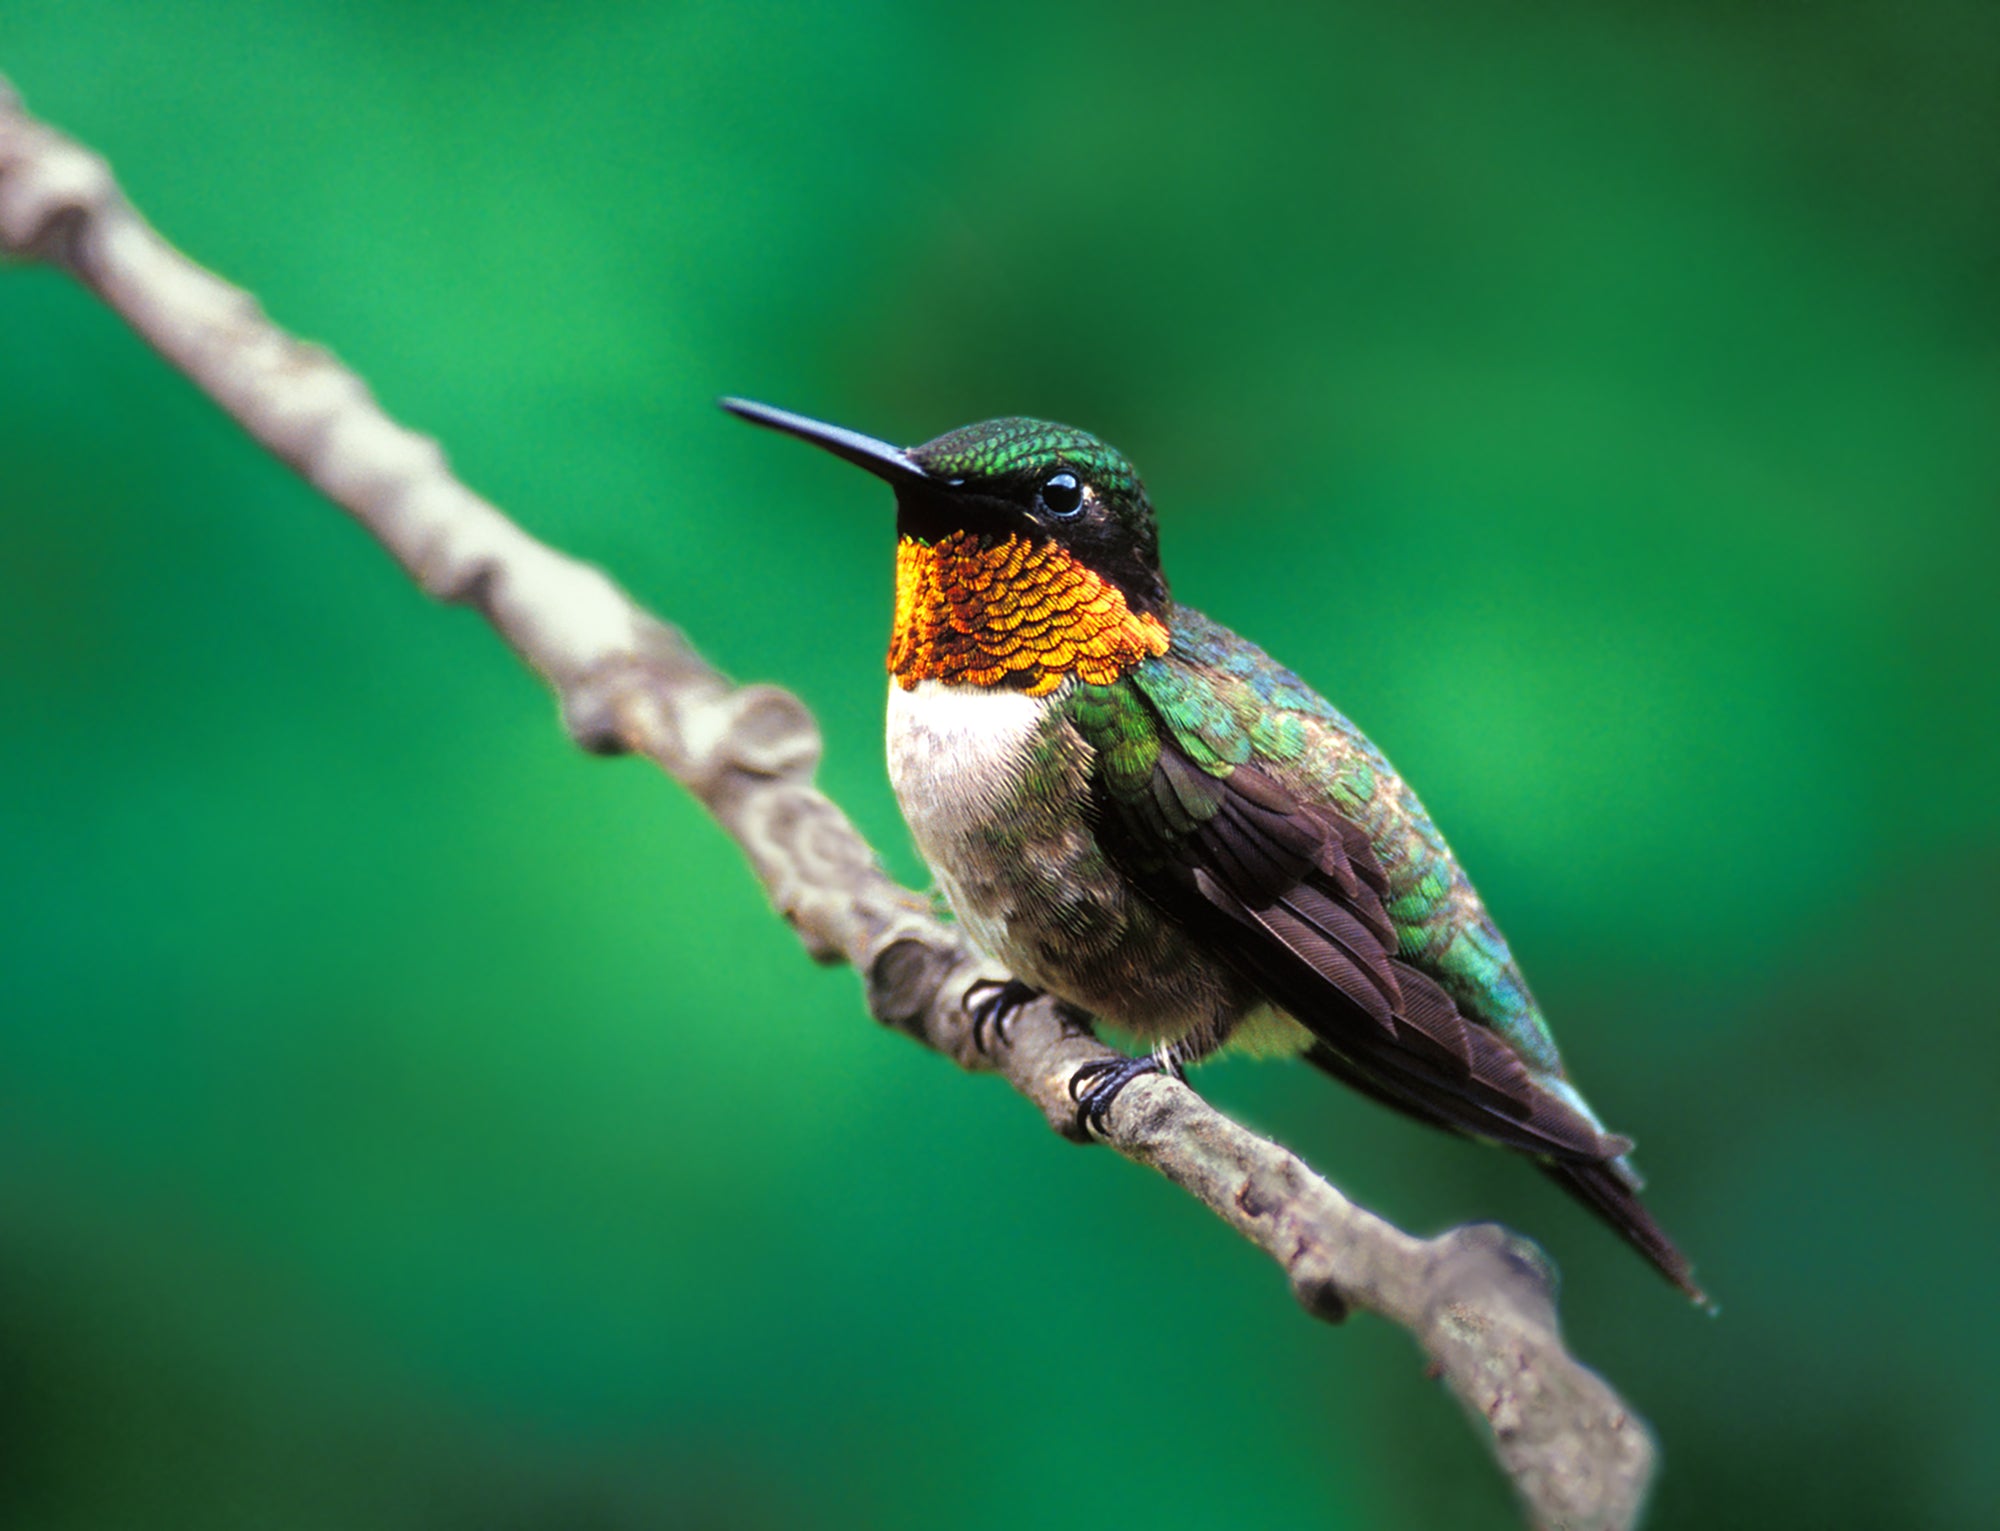 A hummingbird perched on a branch. End of image description.